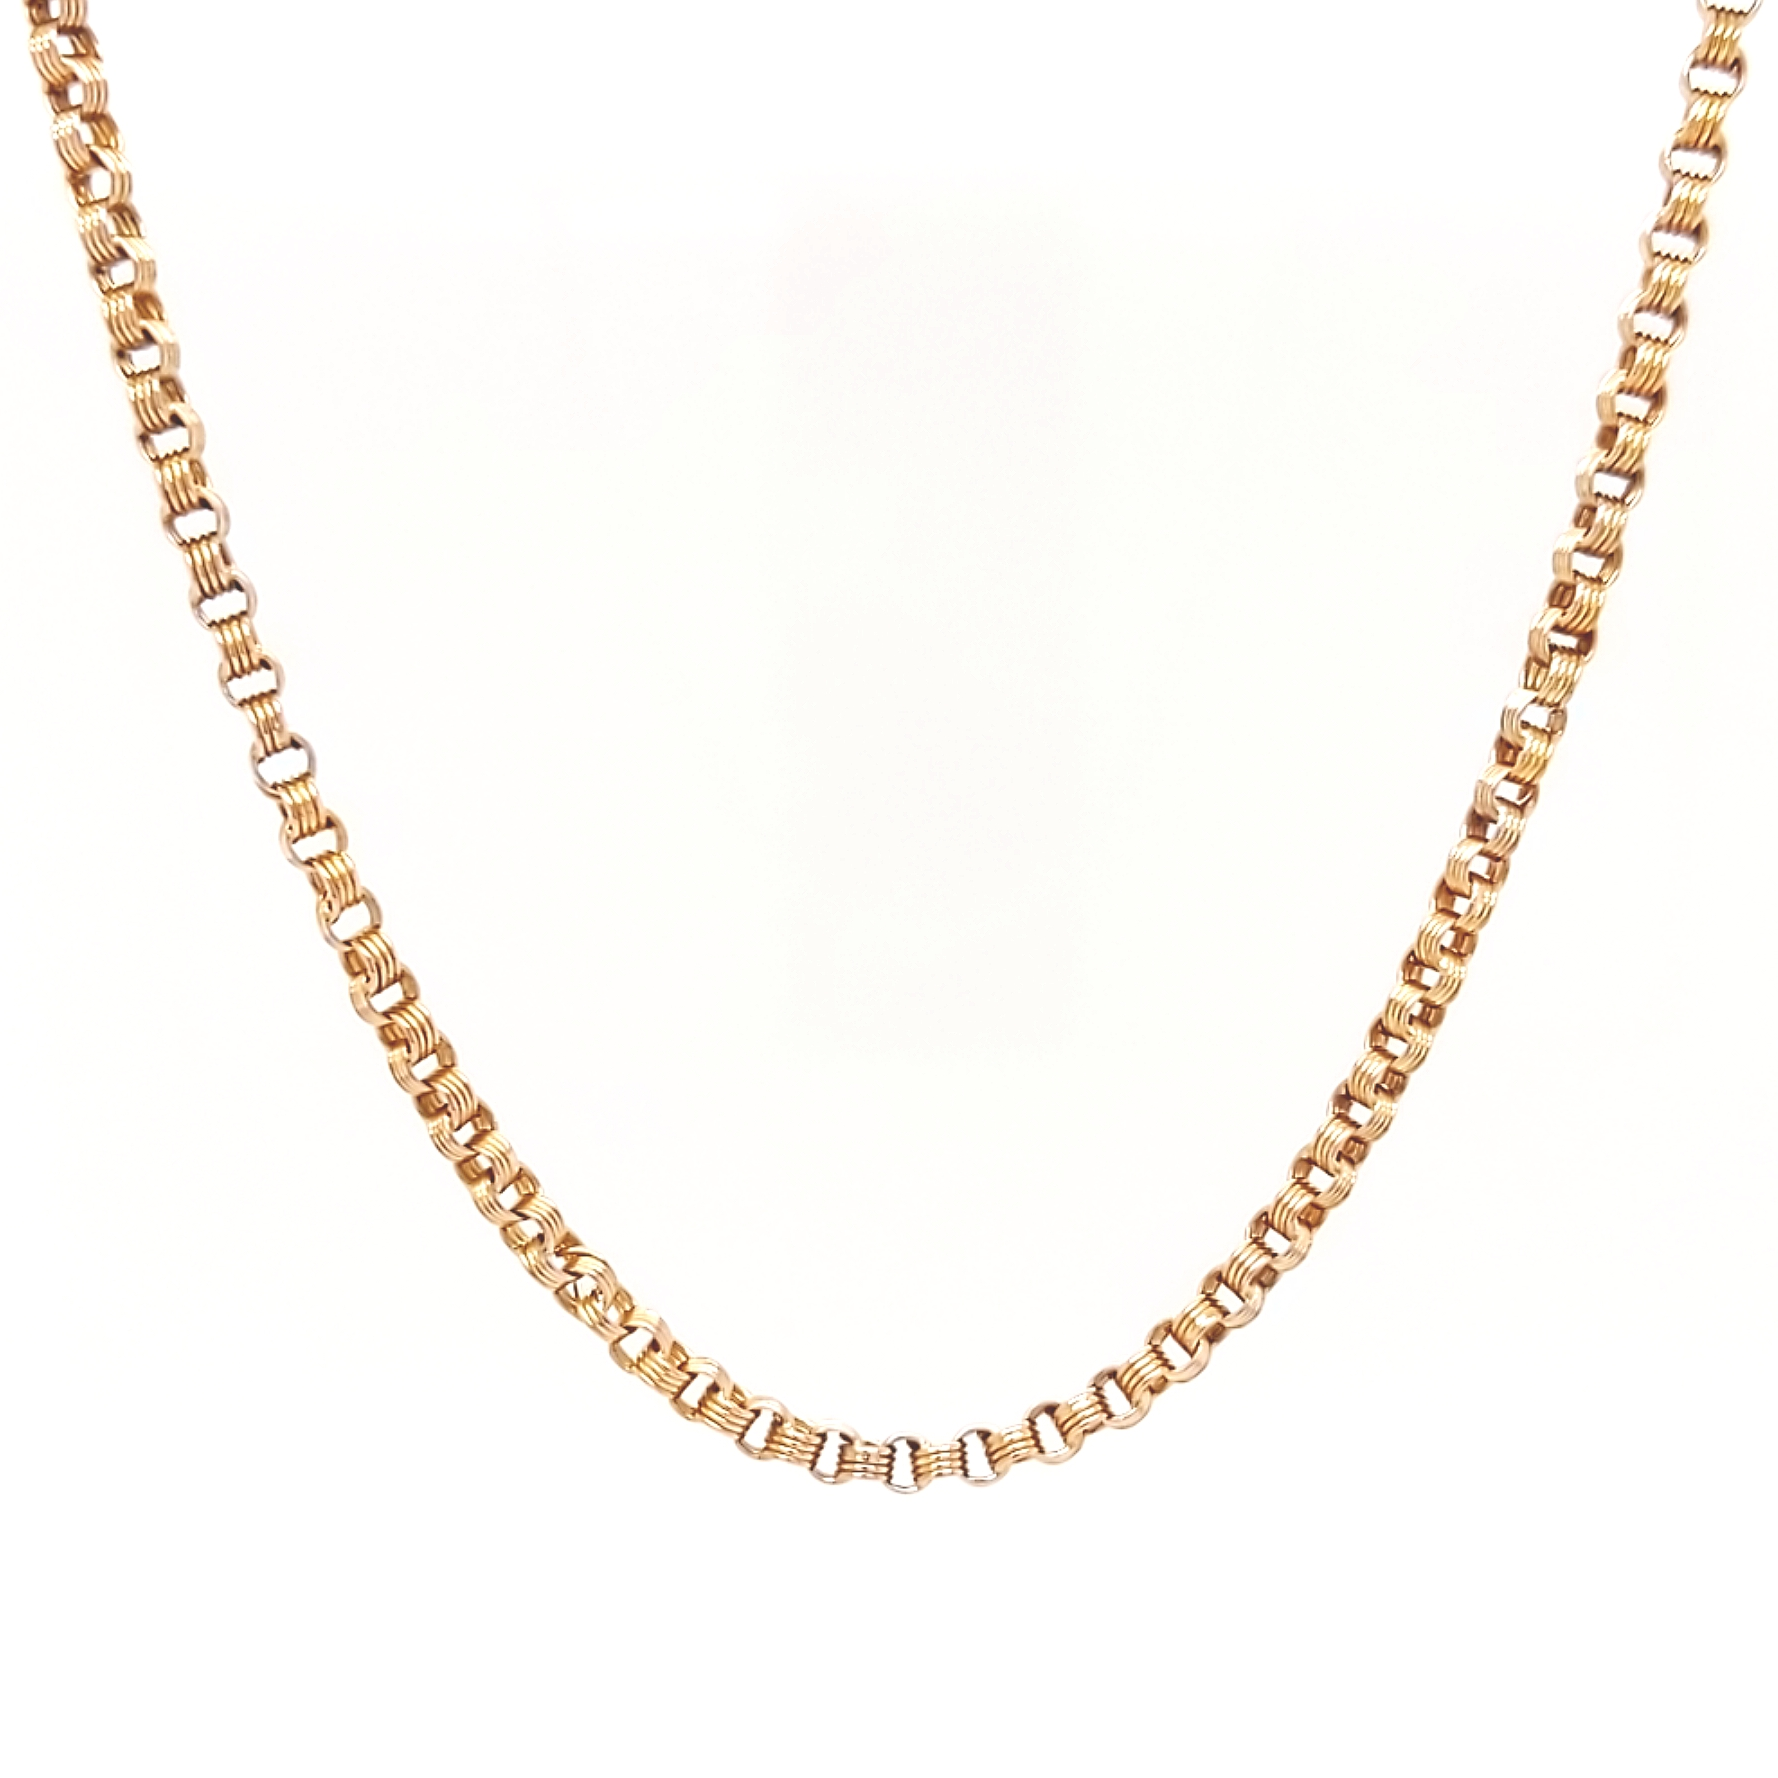 18K Yellow Gold 2.30mm wide 17.5" Woven Link Chain